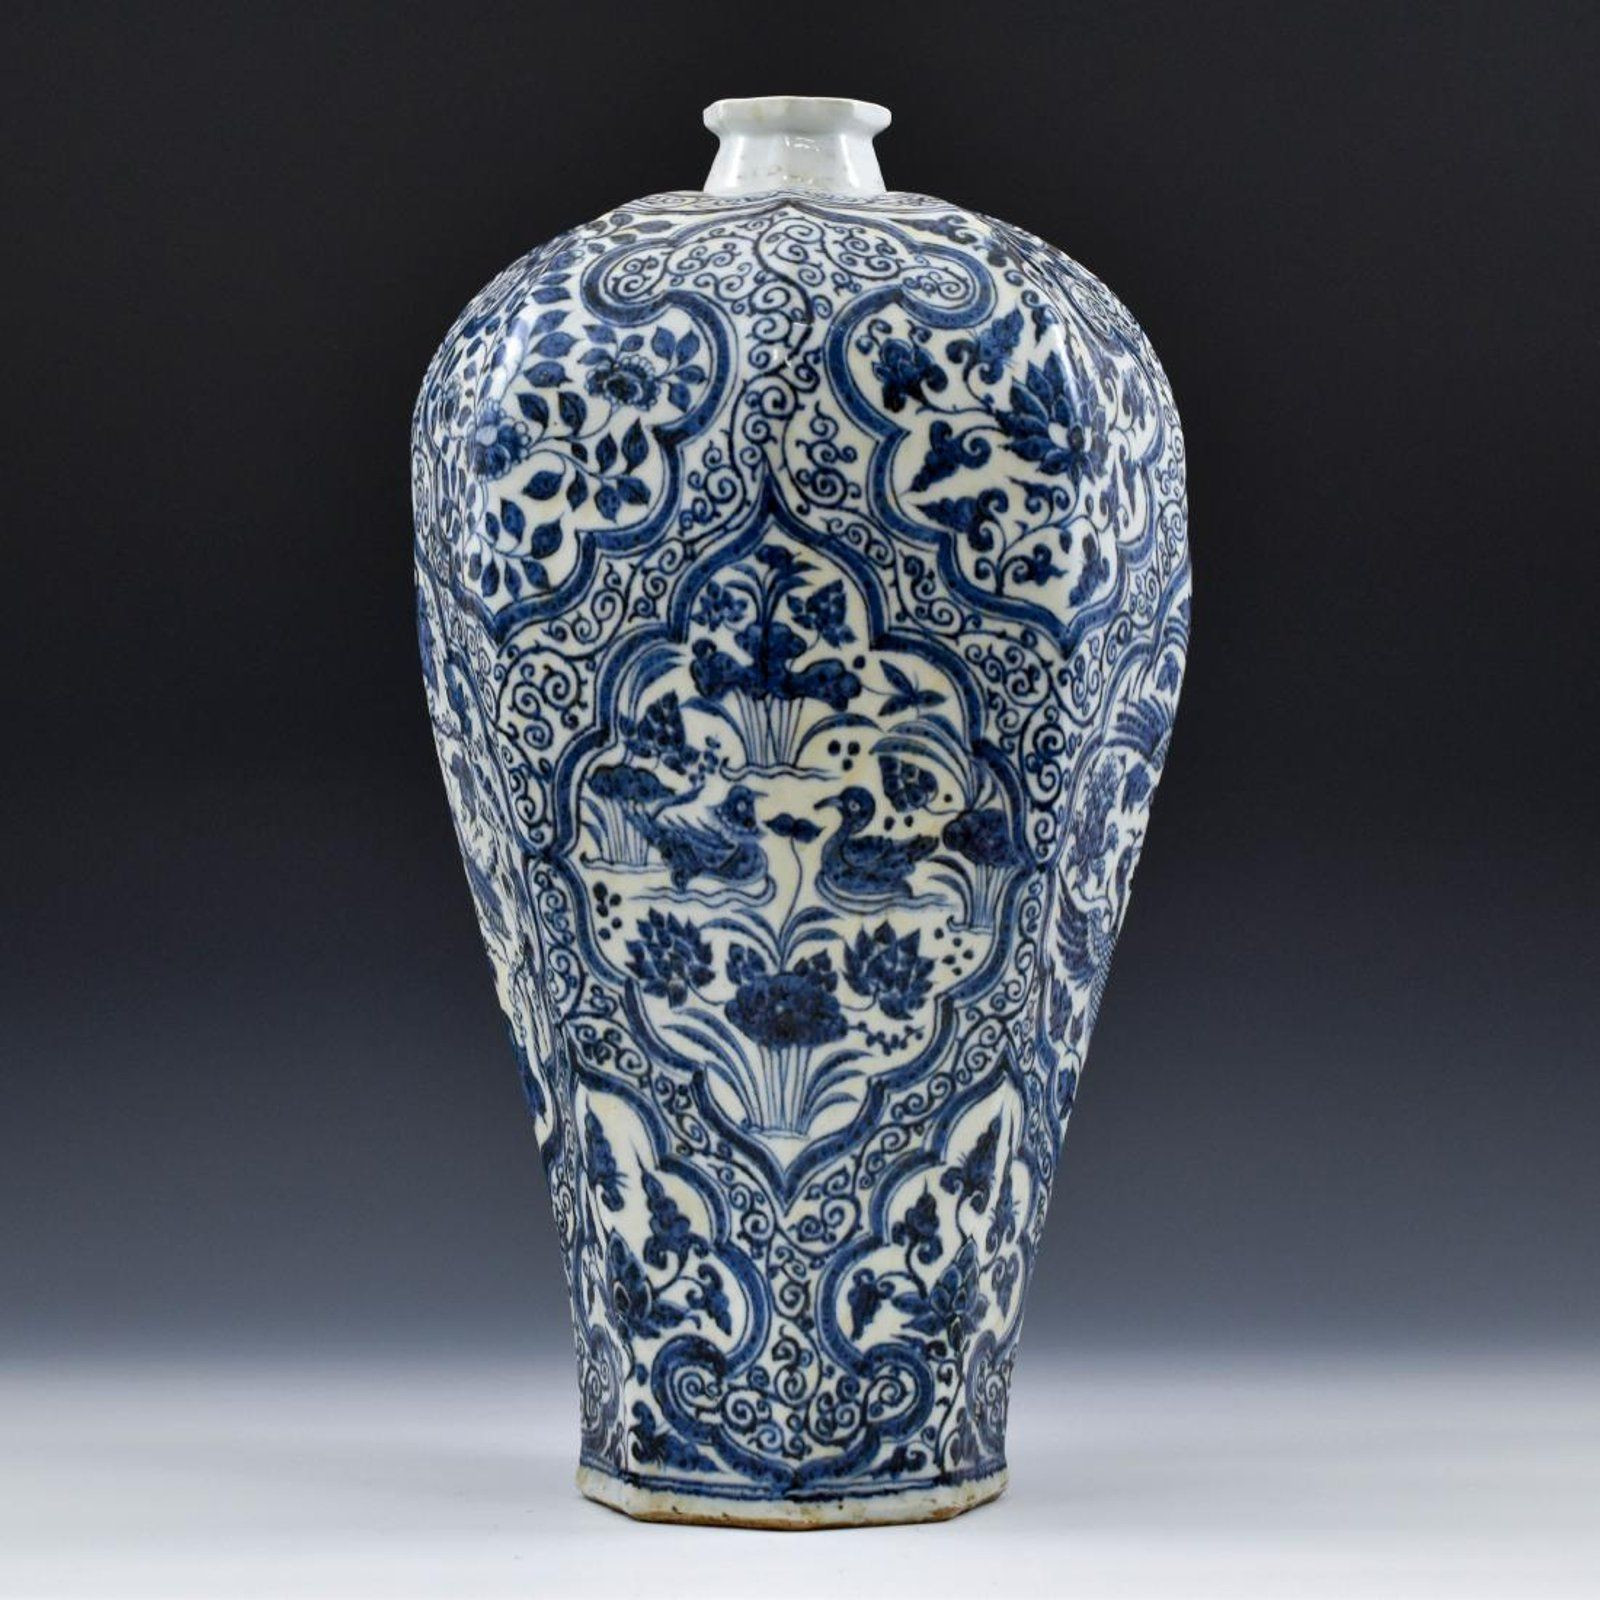 28 attractive White Bowl Vase 2023 free download white bowl vase of blue crystal vase beautiful ming dynasty blue and white octagonal regarding blue crystal vase beautiful ming dynasty blue and white octagonal meiping vase